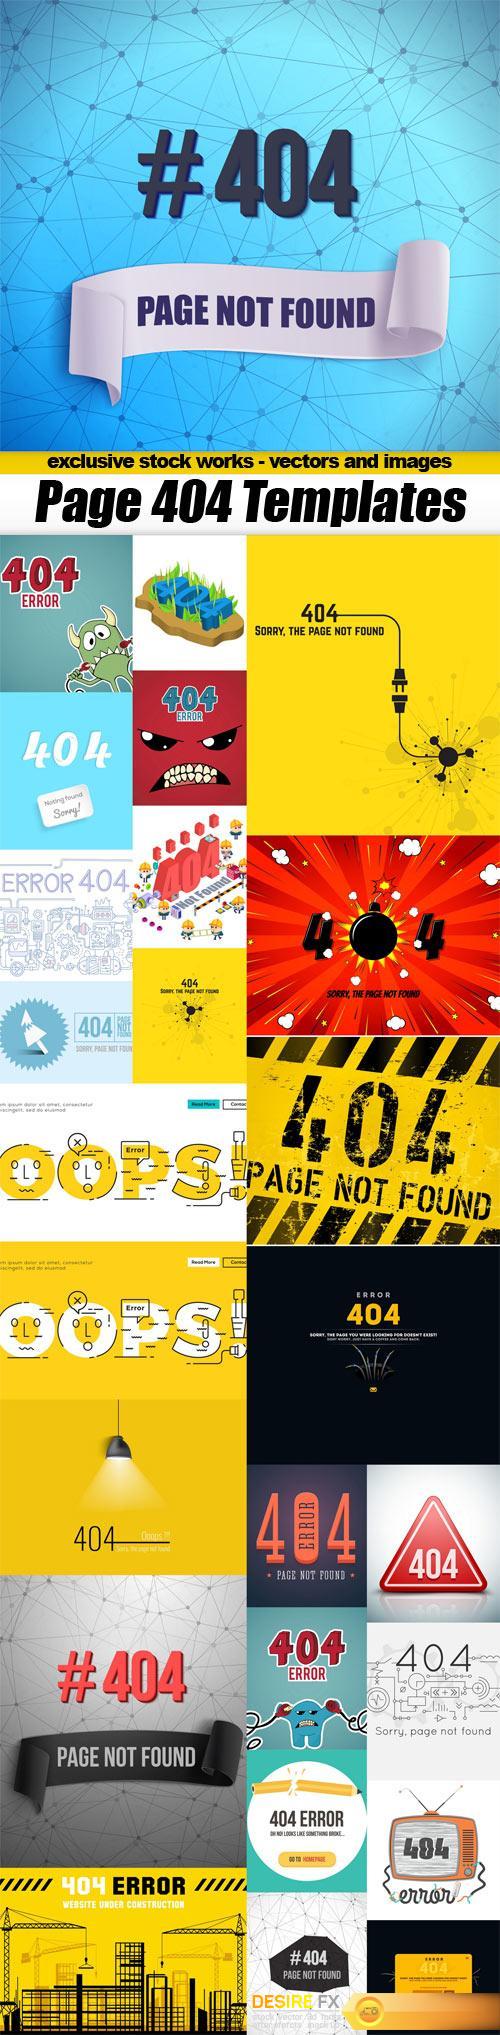 Page 404 Templates - 25x EPS